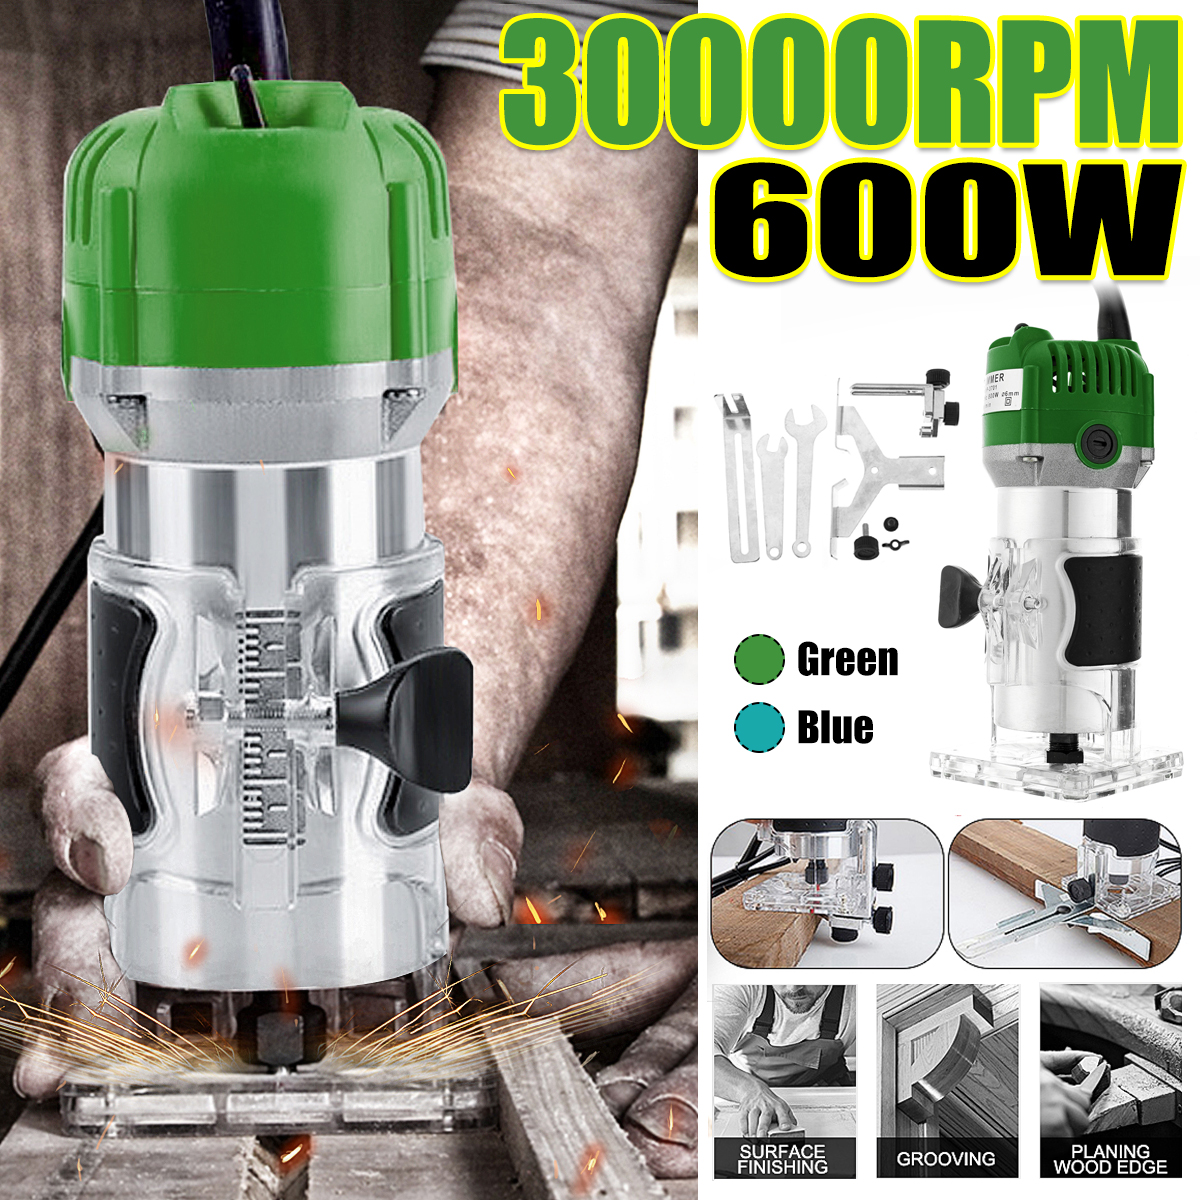 30000RPM-600W-Electric-Hand-Trimmer-Wood-Laminate-Palm-Router-Joiners-Tool-Wood-Trimming-Machine-1821640-1